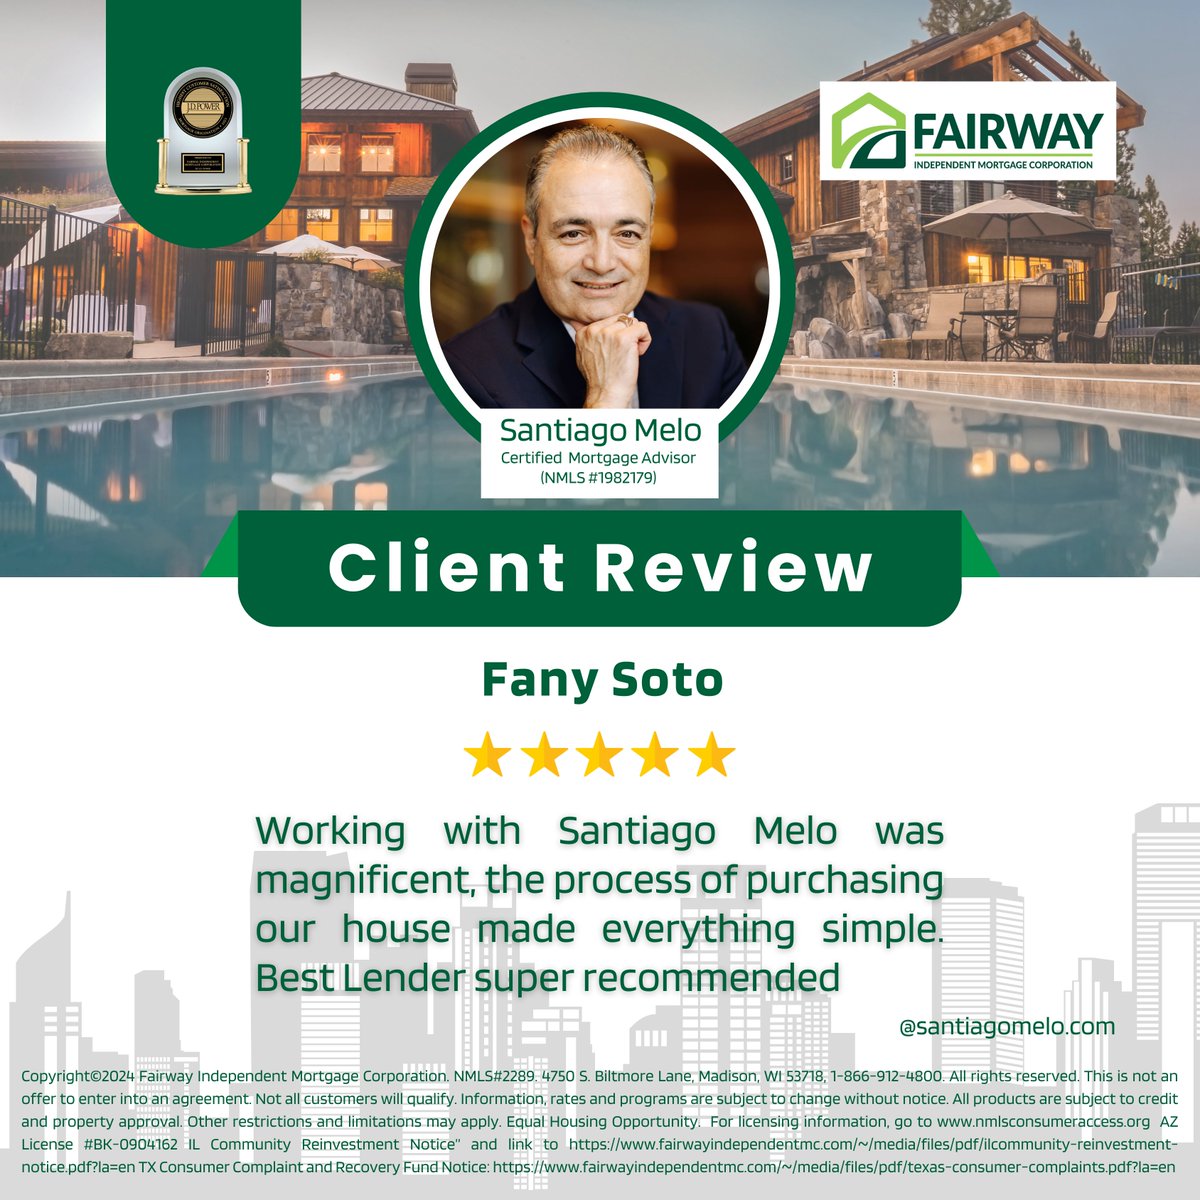 Thrilled to have made your home buying journey smooth and stress-free. Your recommendation means the world to me!

#HomeownershipJourney #DreamHome #ClientReview #HomeBuyingProcess #SantiagoMelo #FairwayIndependentMortgage #SmoothTransaction #HomeownershipGoals #MortgageAdvisor